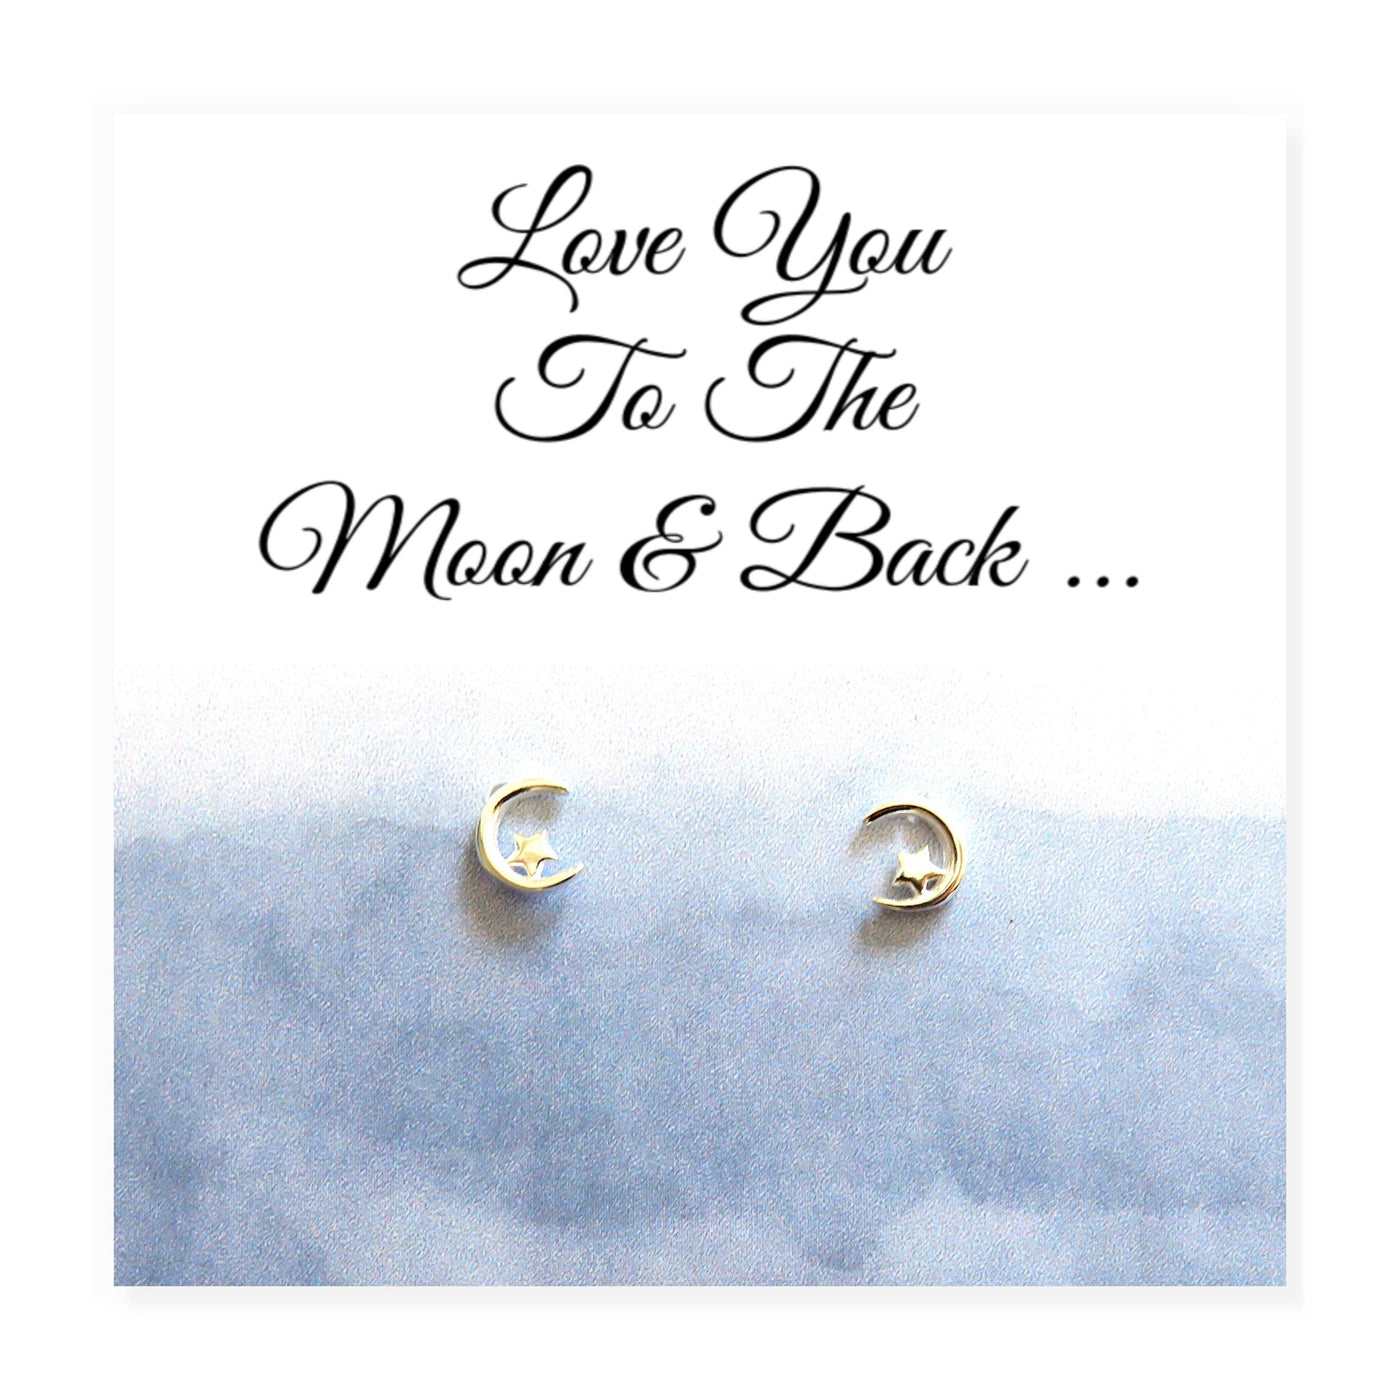 Love You To The Moon & Back Earrings on Message Card